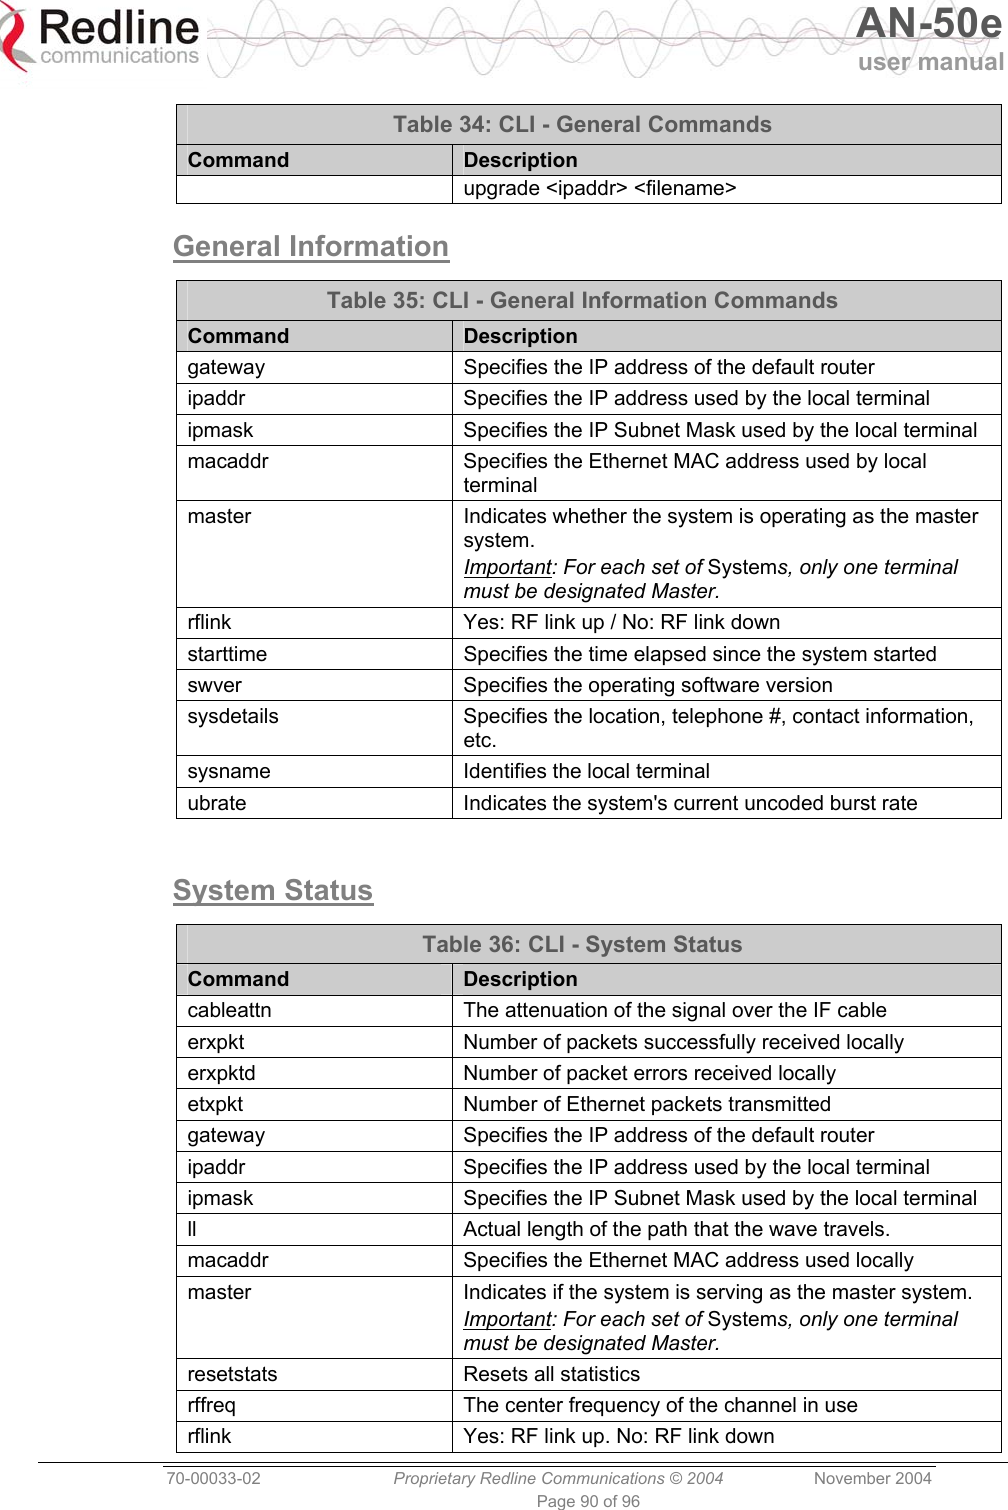   AN-50e user manual  70-00033-02  Proprietary Redline Communications © 2004 November 2004 Page 90 of 96 Table 34: CLI - General Commands Command  Description upgrade &lt;ipaddr&gt; &lt;filename&gt; General Information   Table 35: CLI - General Information Commands Command  Description gateway  Specifies the IP address of the default router ipaddr  Specifies the IP address used by the local terminal ipmask  Specifies the IP Subnet Mask used by the local terminal macaddr  Specifies the Ethernet MAC address used by local terminal master  Indicates whether the system is operating as the master system. Important: For each set of Systems, only one terminal must be designated Master. rflink  Yes: RF link up / No: RF link down starttime  Specifies the time elapsed since the system started swver  Specifies the operating software version sysdetails  Specifies the location, telephone #, contact information, etc. sysname  Identifies the local terminal ubrate Indicates the system&apos;s current uncoded burst rate  System Status   Table 36: CLI - System Status Command  Description cableattn  The attenuation of the signal over the IF cable erxpkt  Number of packets successfully received locally erxpktd  Number of packet errors received locally etxpkt  Number of Ethernet packets transmitted gateway  Specifies the IP address of the default router ipaddr  Specifies the IP address used by the local terminal ipmask  Specifies the IP Subnet Mask used by the local terminal ll  Actual length of the path that the wave travels. macaddr  Specifies the Ethernet MAC address used locally master  Indicates if the system is serving as the master system. Important: For each set of Systems, only one terminal must be designated Master. resetstats Resets all statistics rffreq  The center frequency of the channel in use rflink  Yes: RF link up. No: RF link down 